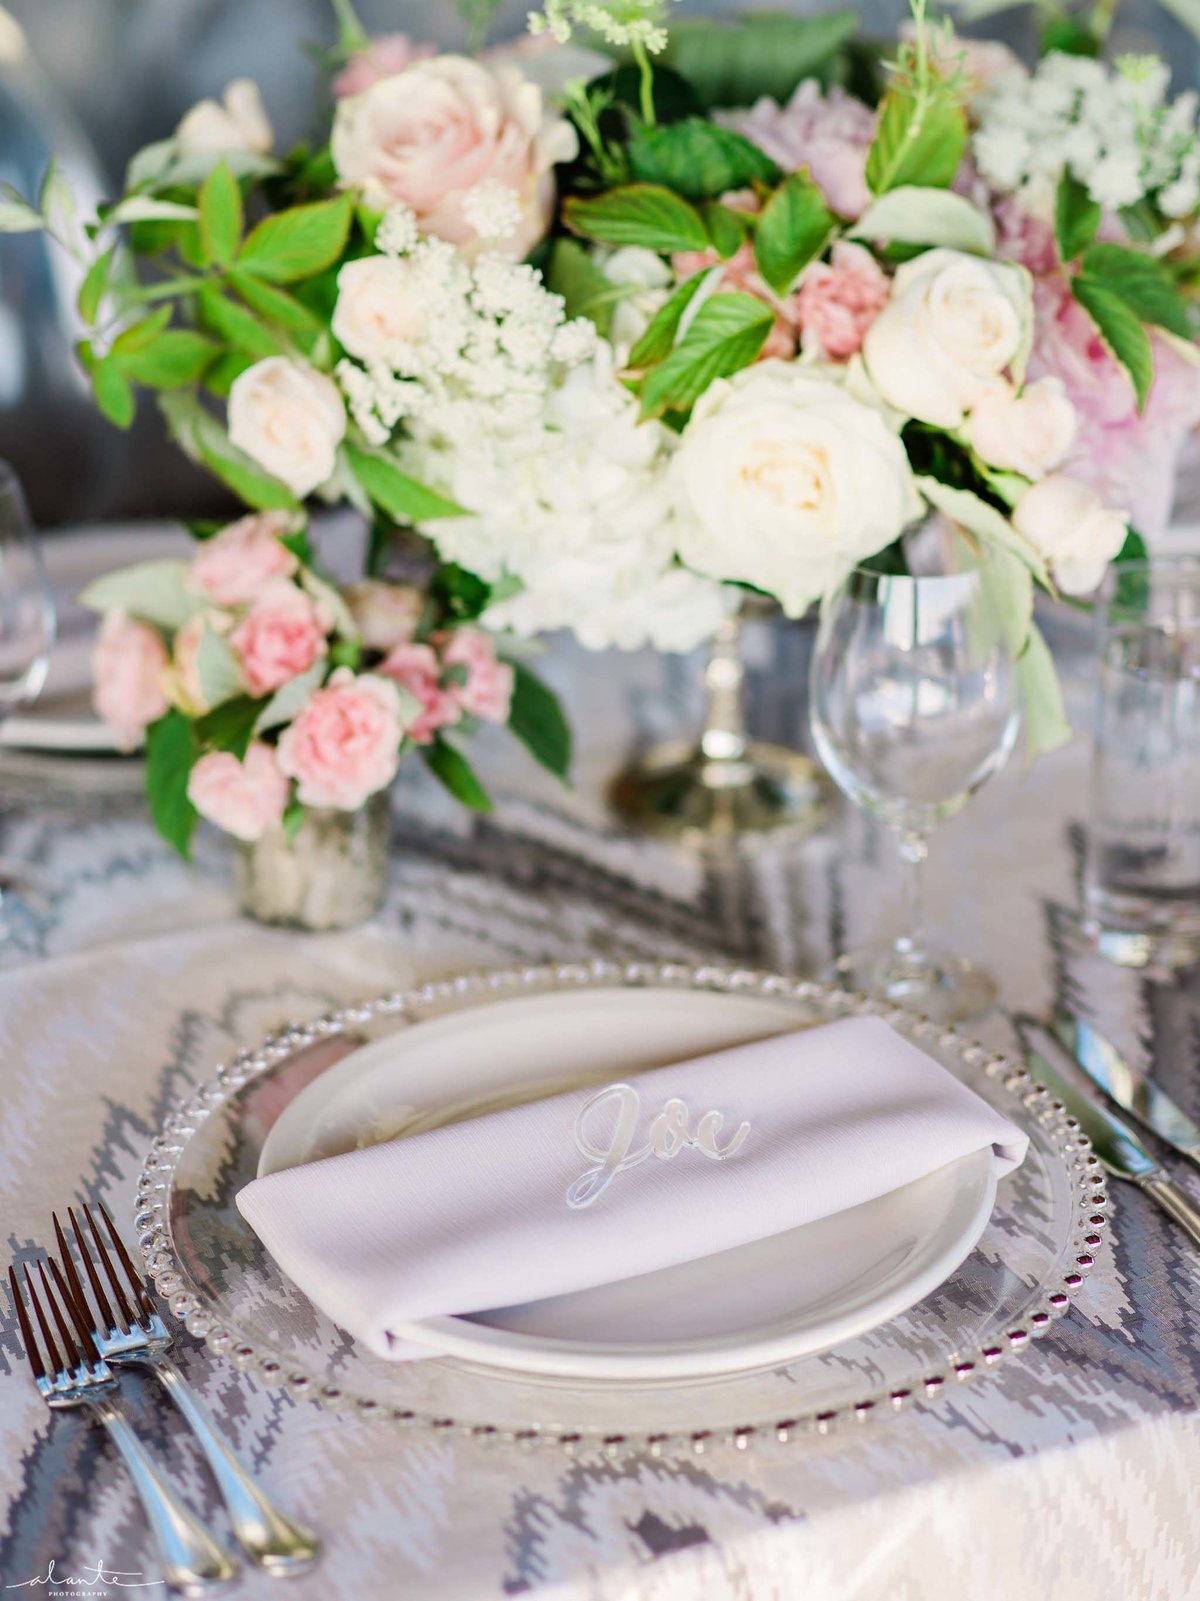 Wonderful details of custom lucite name cards and ikat linens  at this wedding reception.